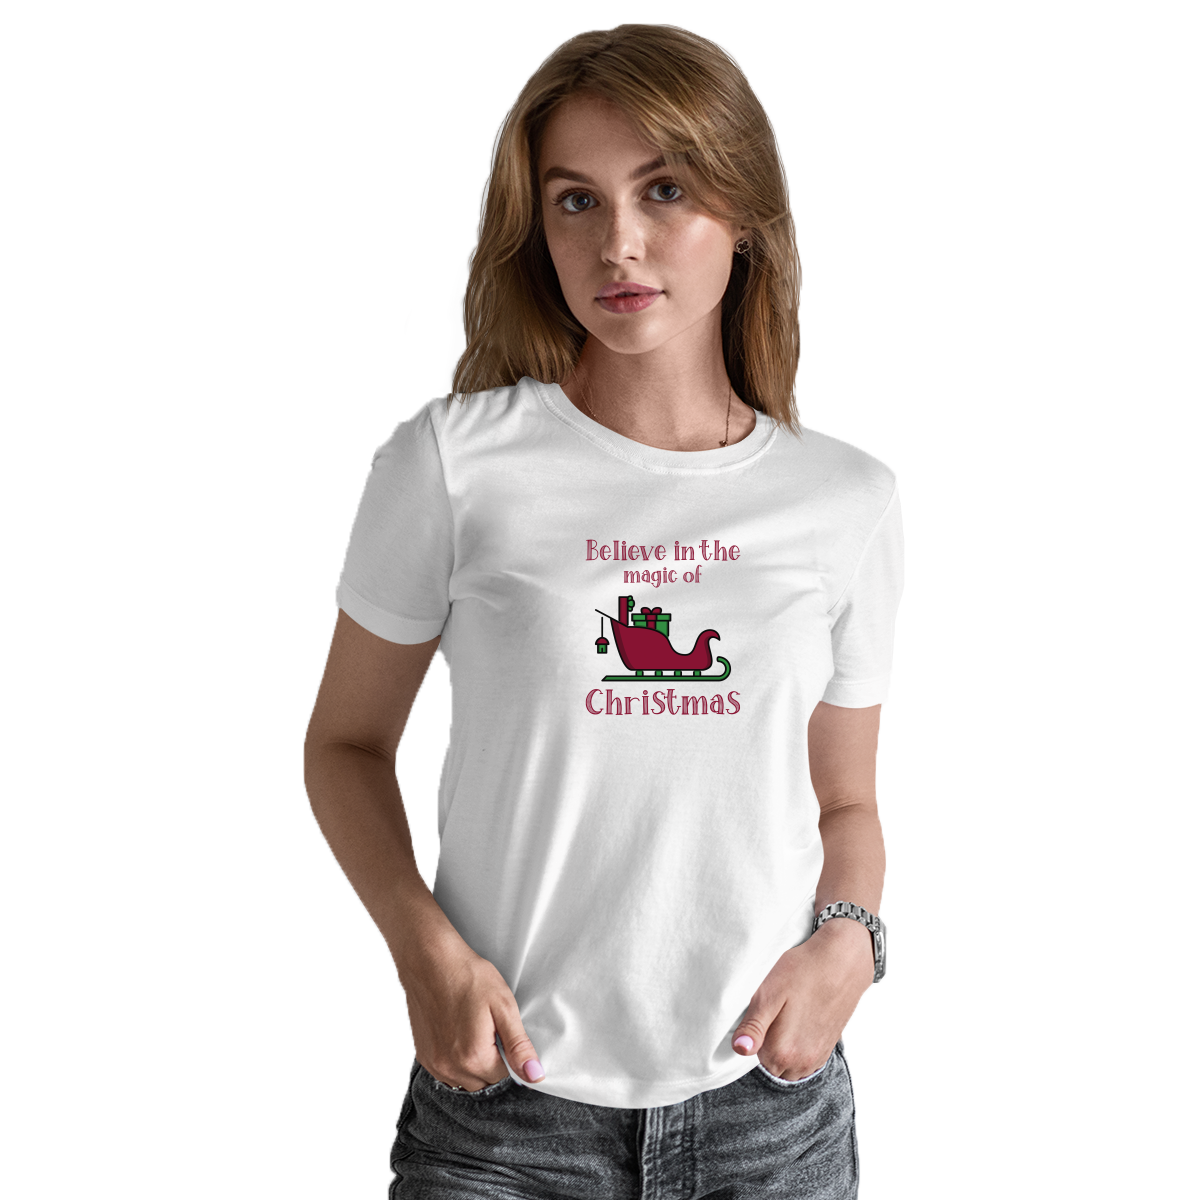 Believe in the Magic of Christmas Women's T-shirt | White